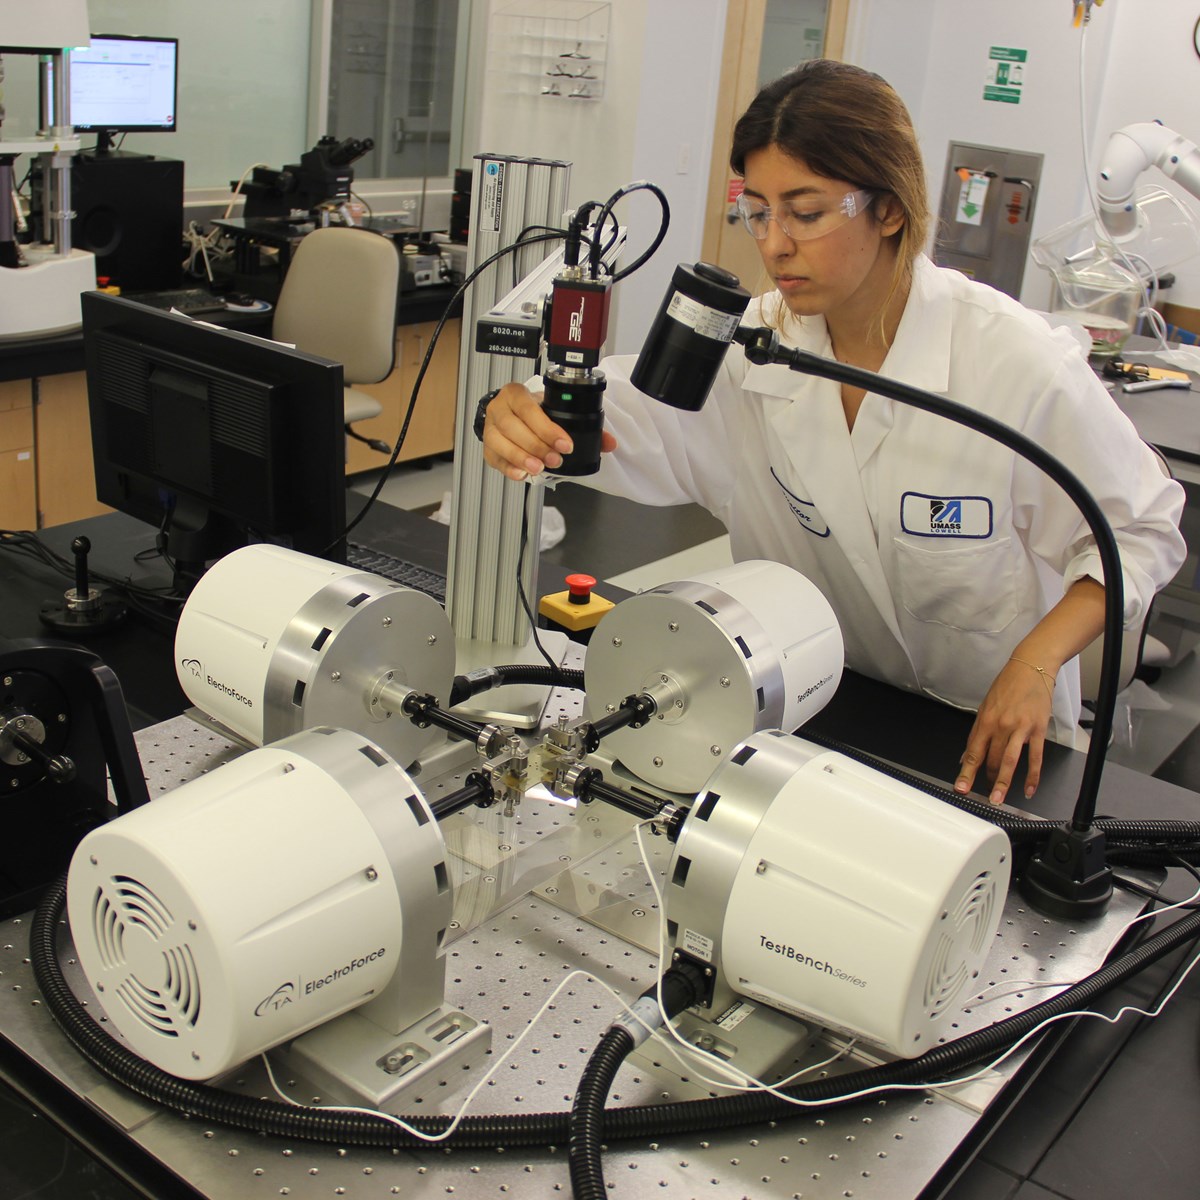 A female graduate student works on Mechanical Engineering equipment